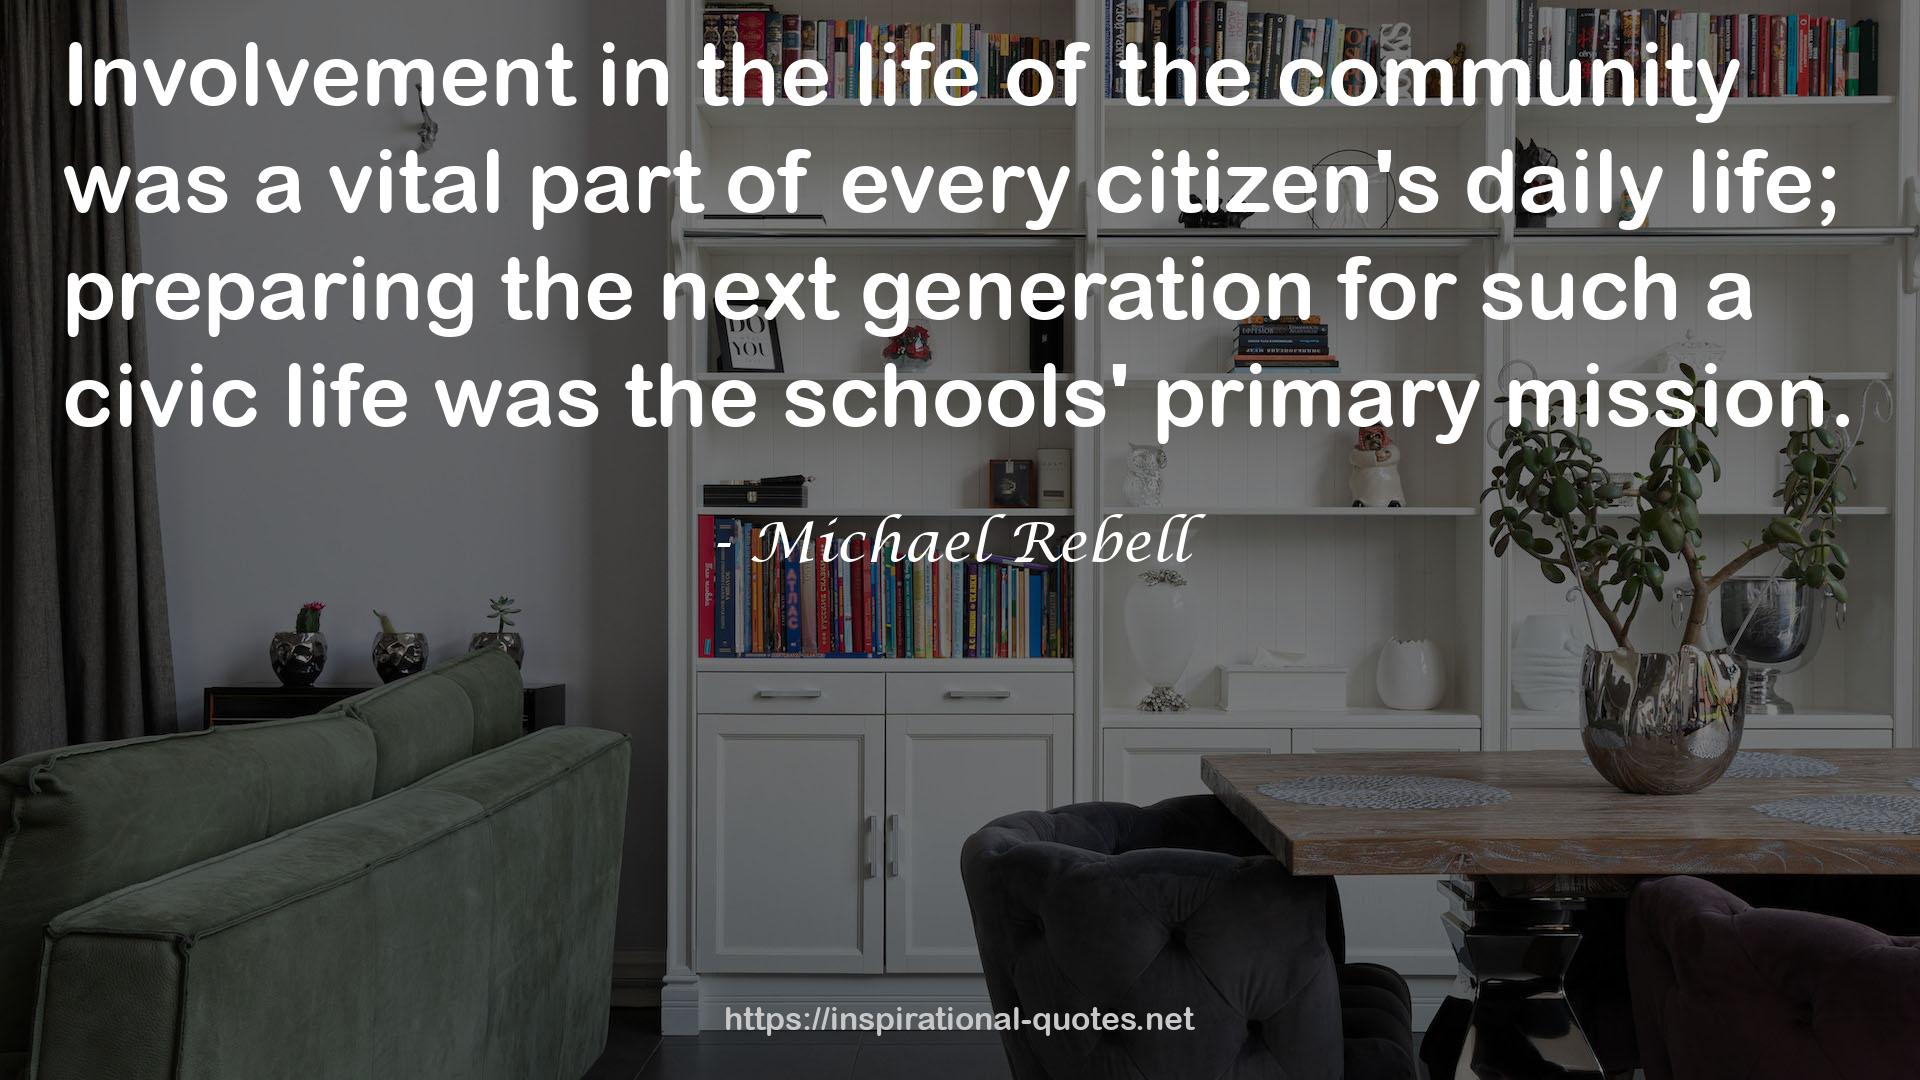 Michael Rebell QUOTES